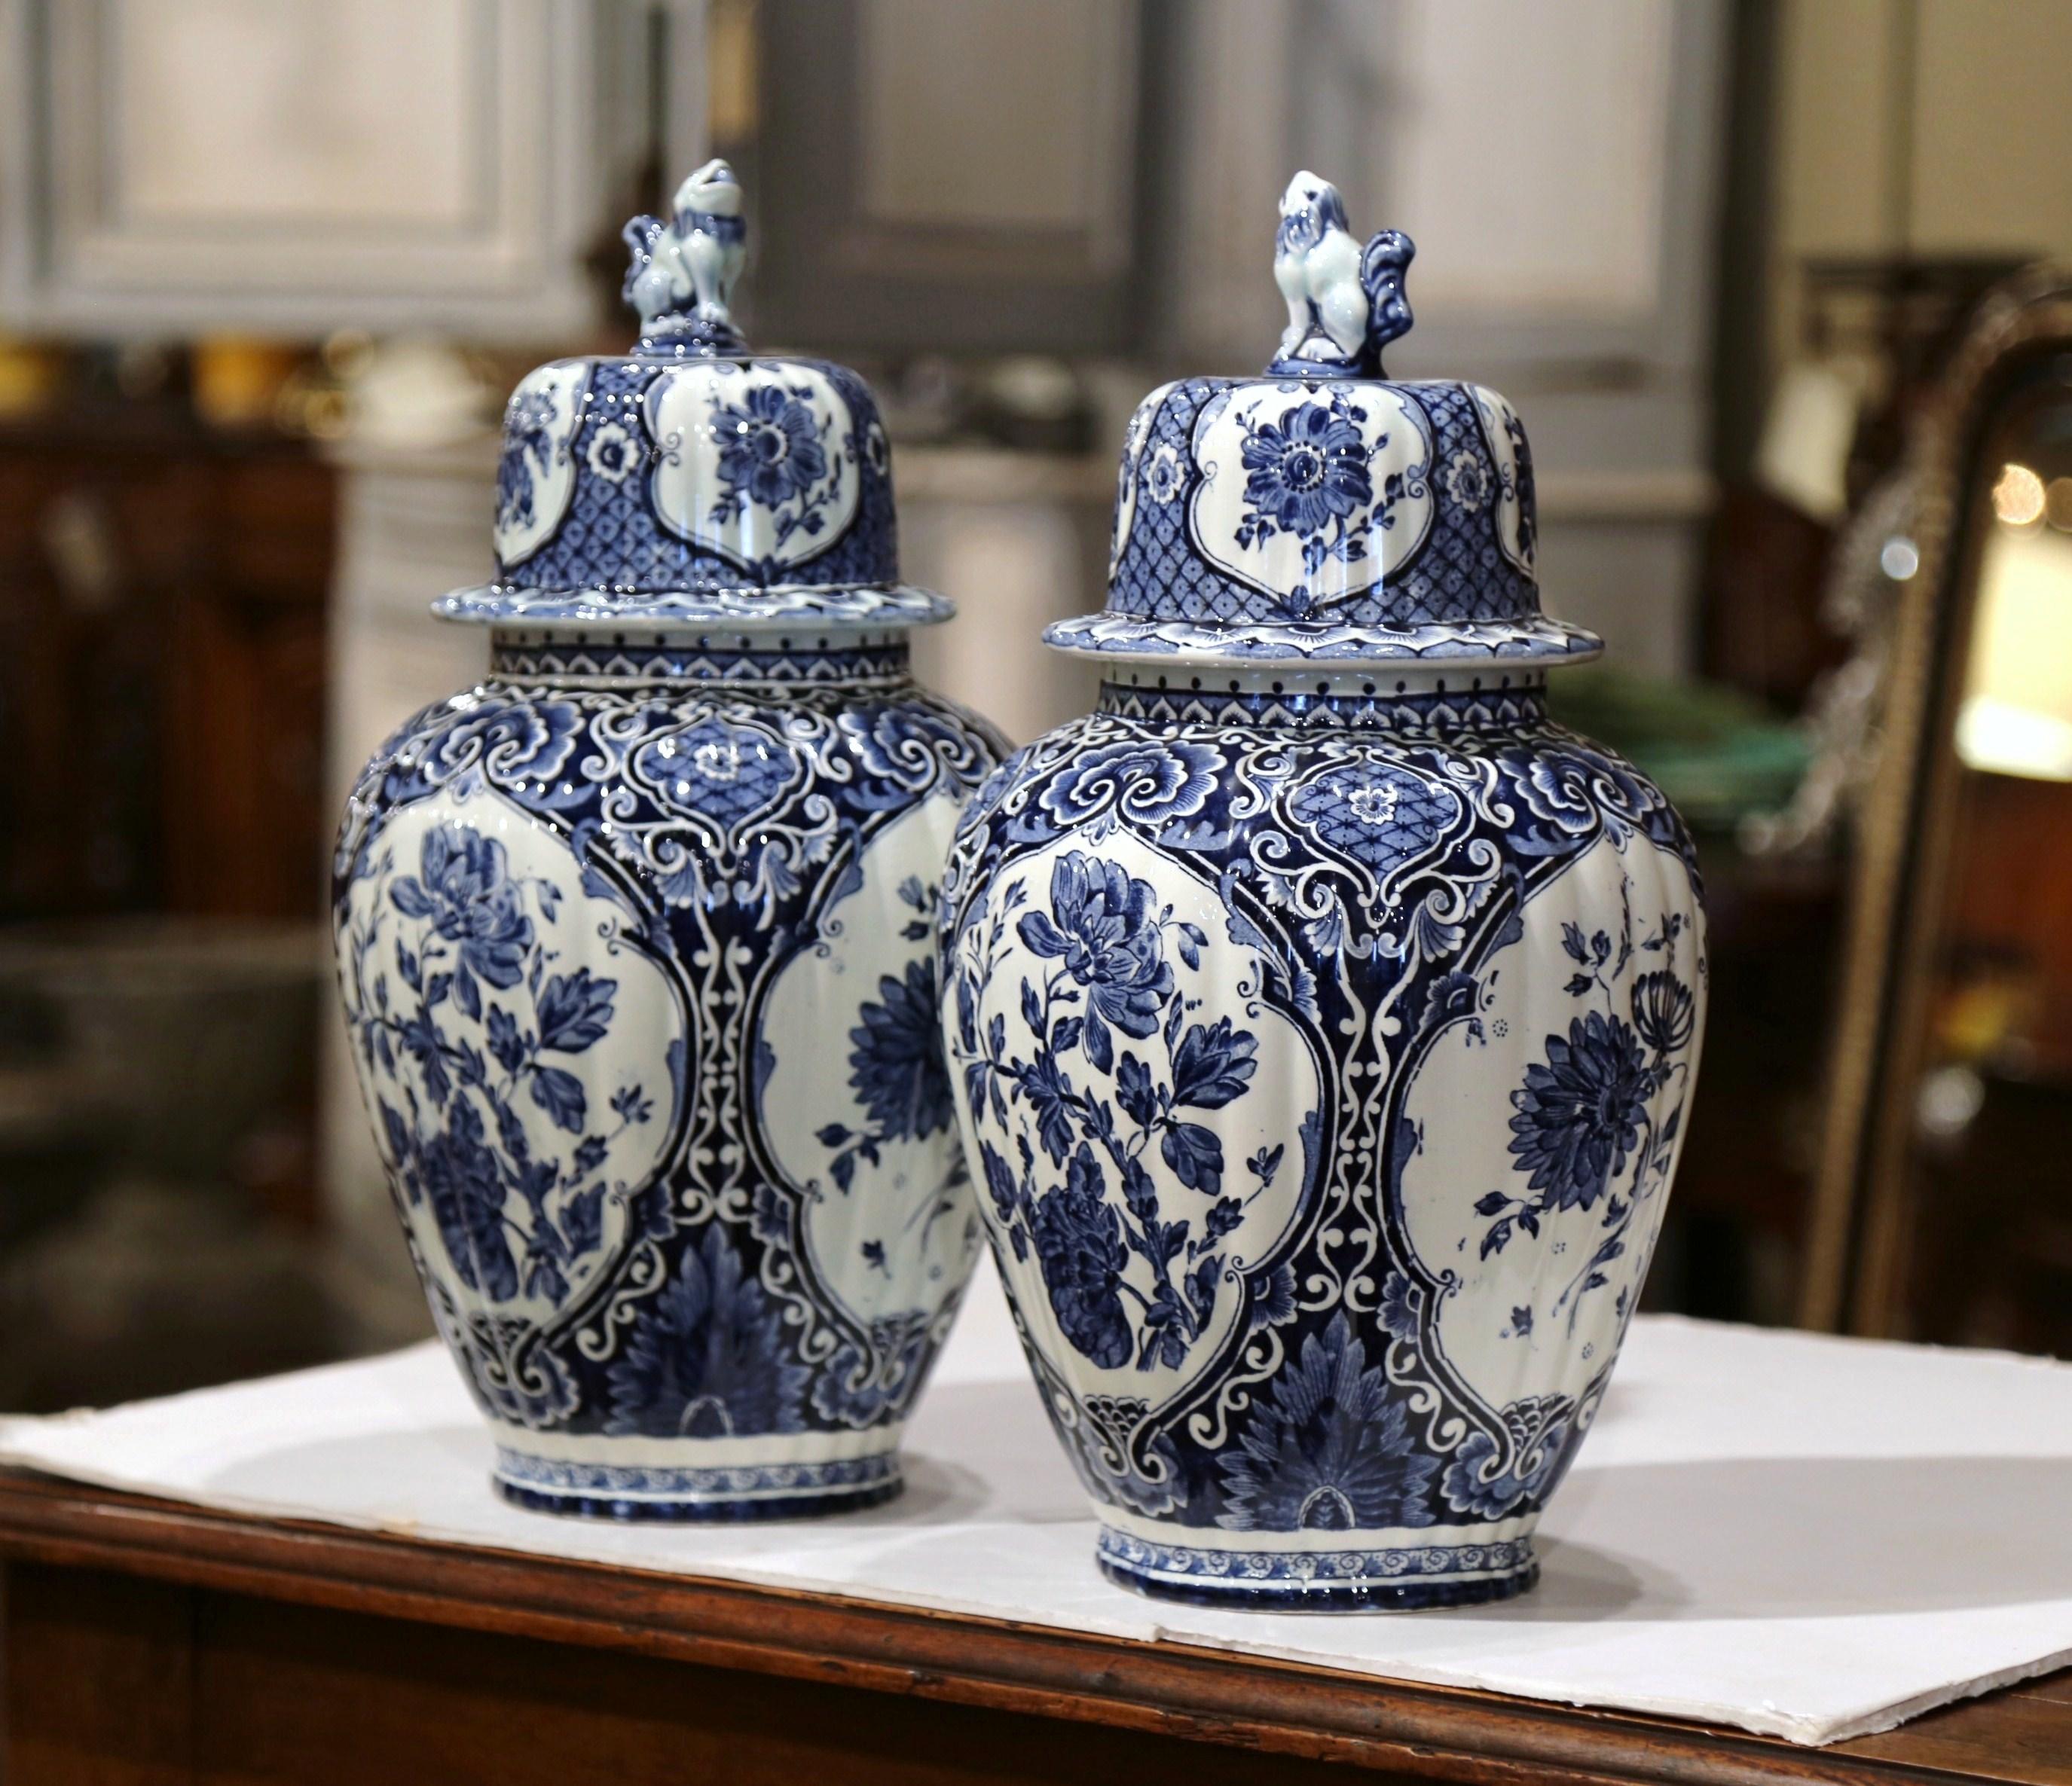 Place this large and elegant pair of vintage ceramic ginger jars on a mantel. Created in Holland, circa 1950, the faience potiches feature hand painted medallions with Classic Dutch flowers and foliage. The traditional blue and white jars have a